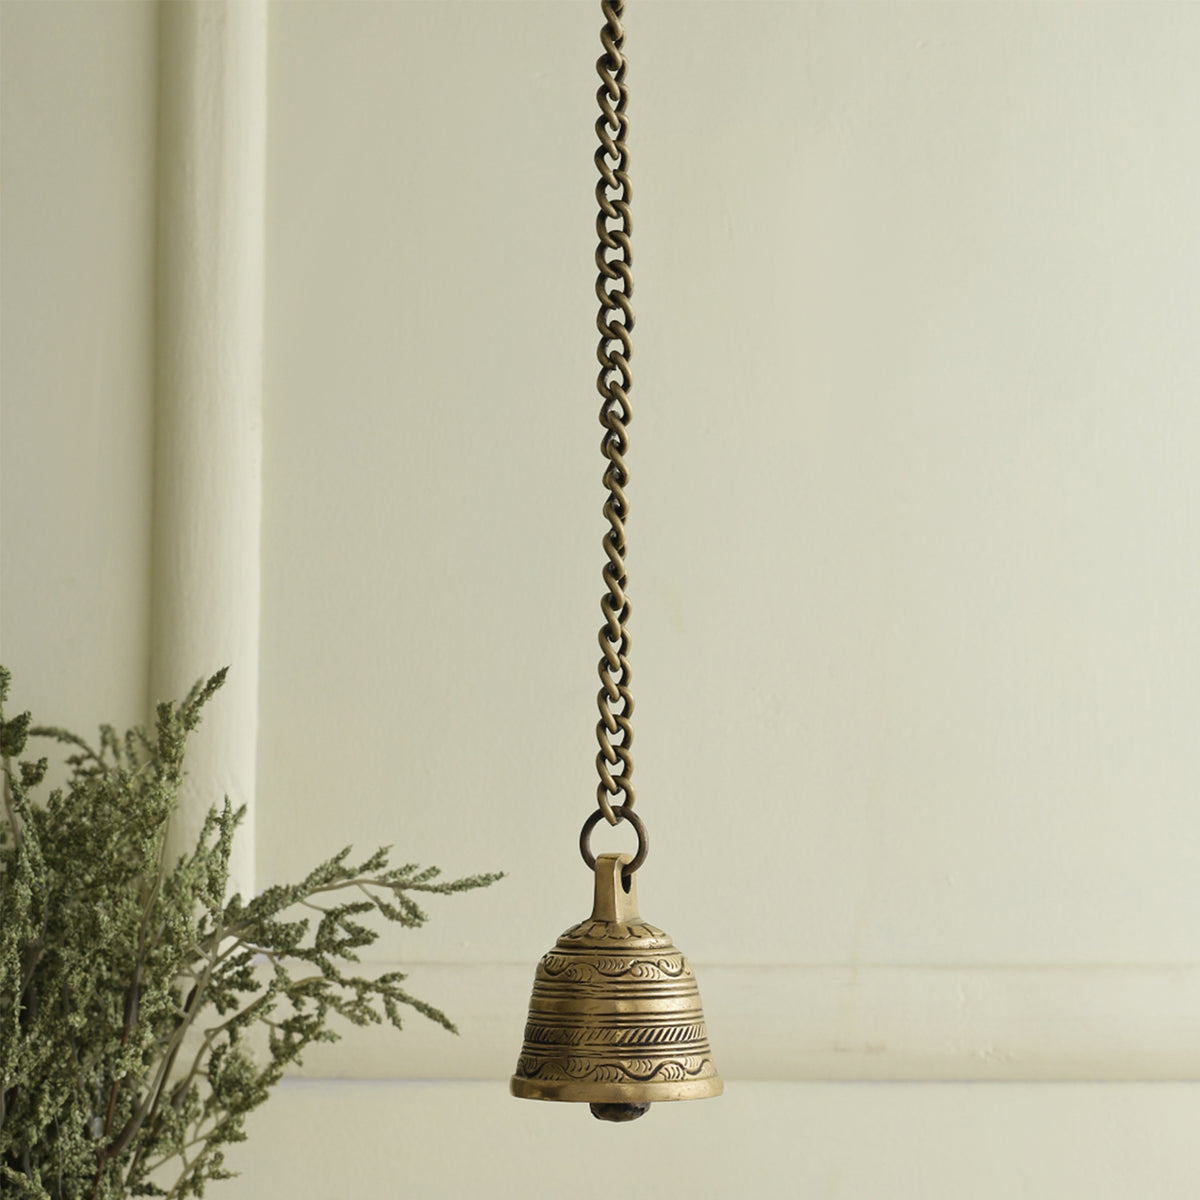 Indian traditional Brass Hanging Bell With Chain for Home & Temple Golden 